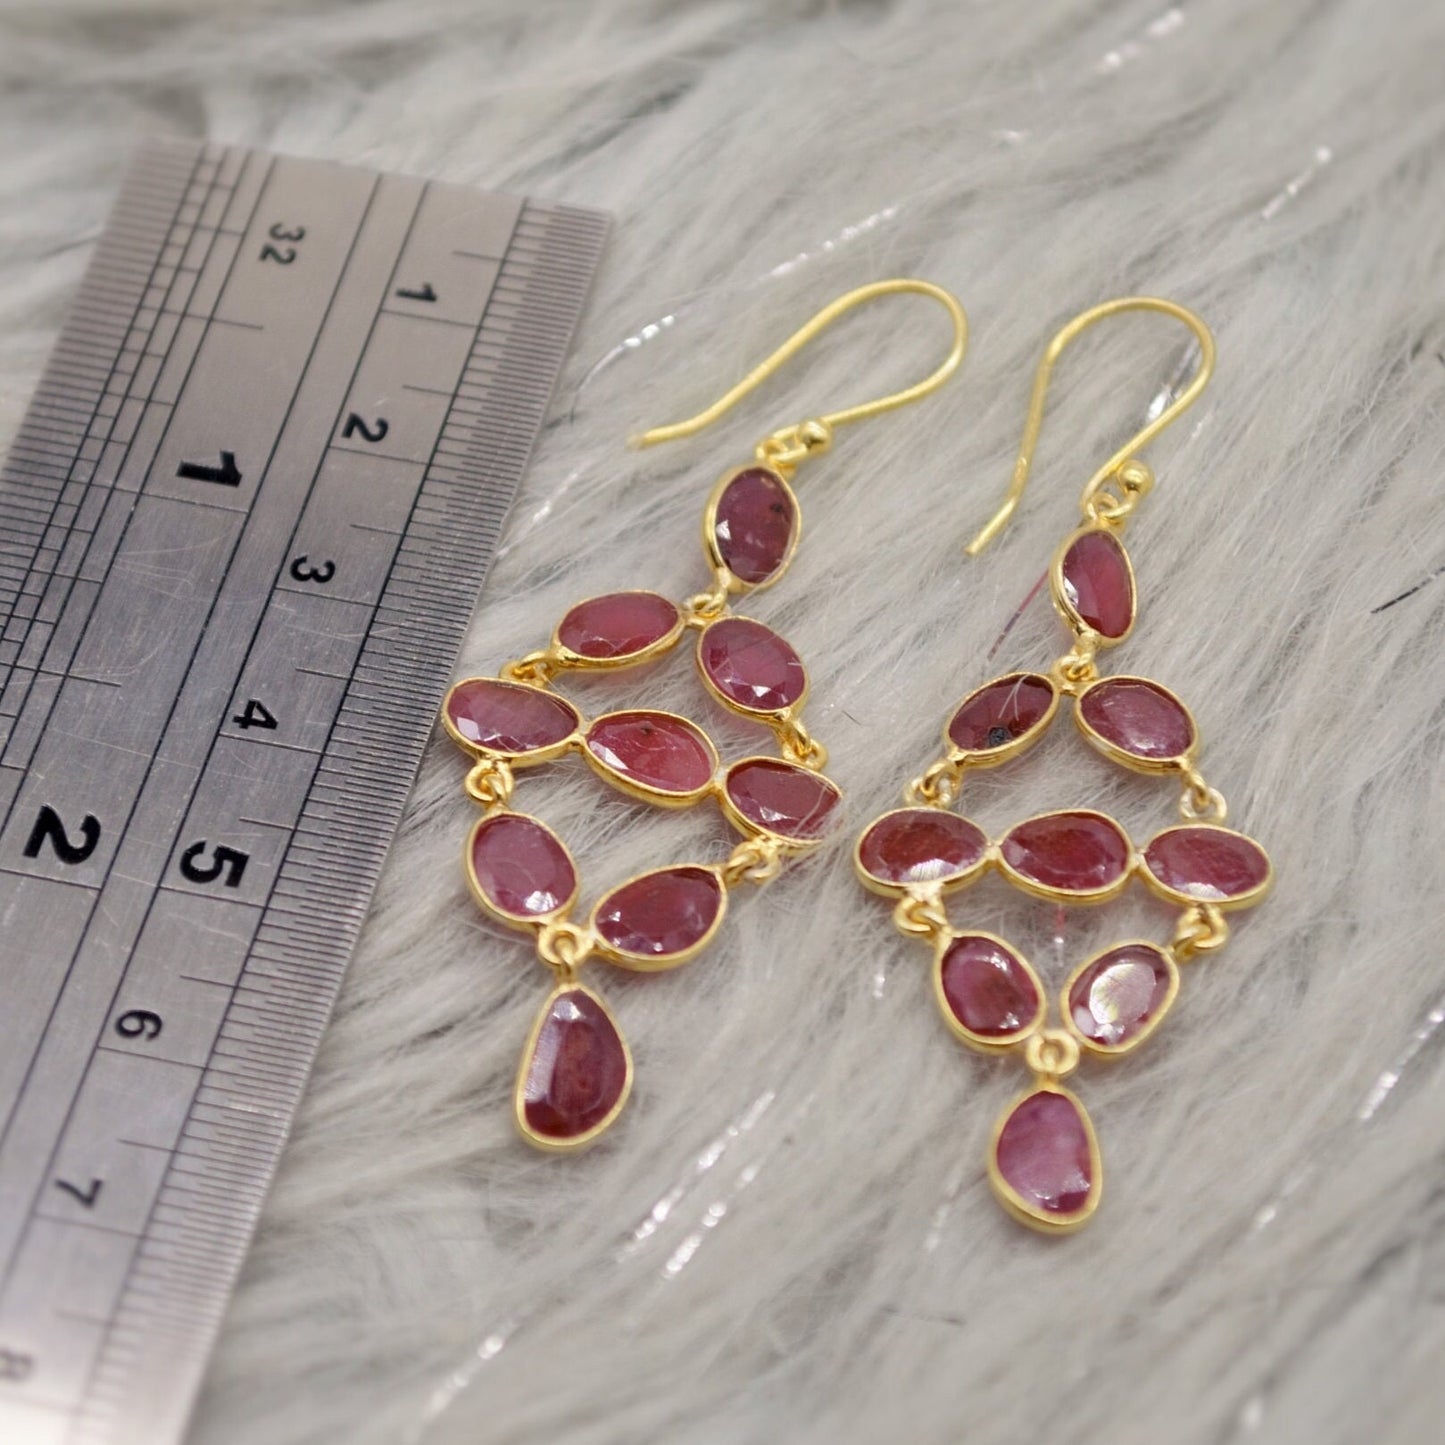 Red Ruby Earrings, Gold Plated Sterling Silver Earrings, Gold Gemstone Earrings, Ruby Dangle Drop Earrings, Bridesmaid, Gifts For Her